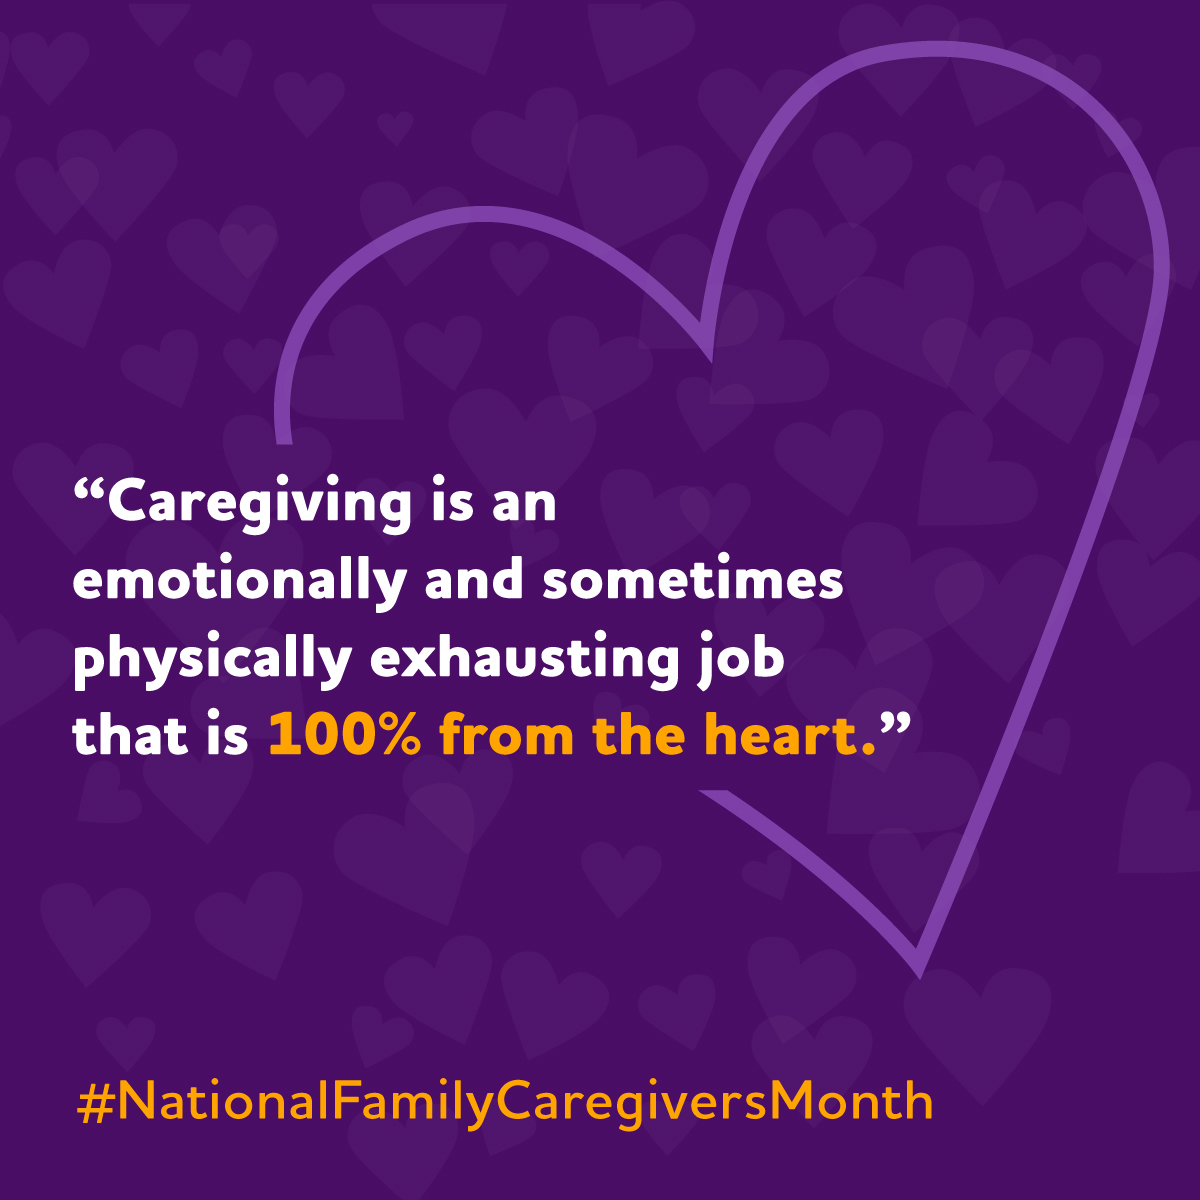 During this week of gratitude, we want to thank all those who provide care for those living with Alzheimer's and other dementia. Your love and dedication is an inspiration to us all. #NationalFamilyCaregiversMonth